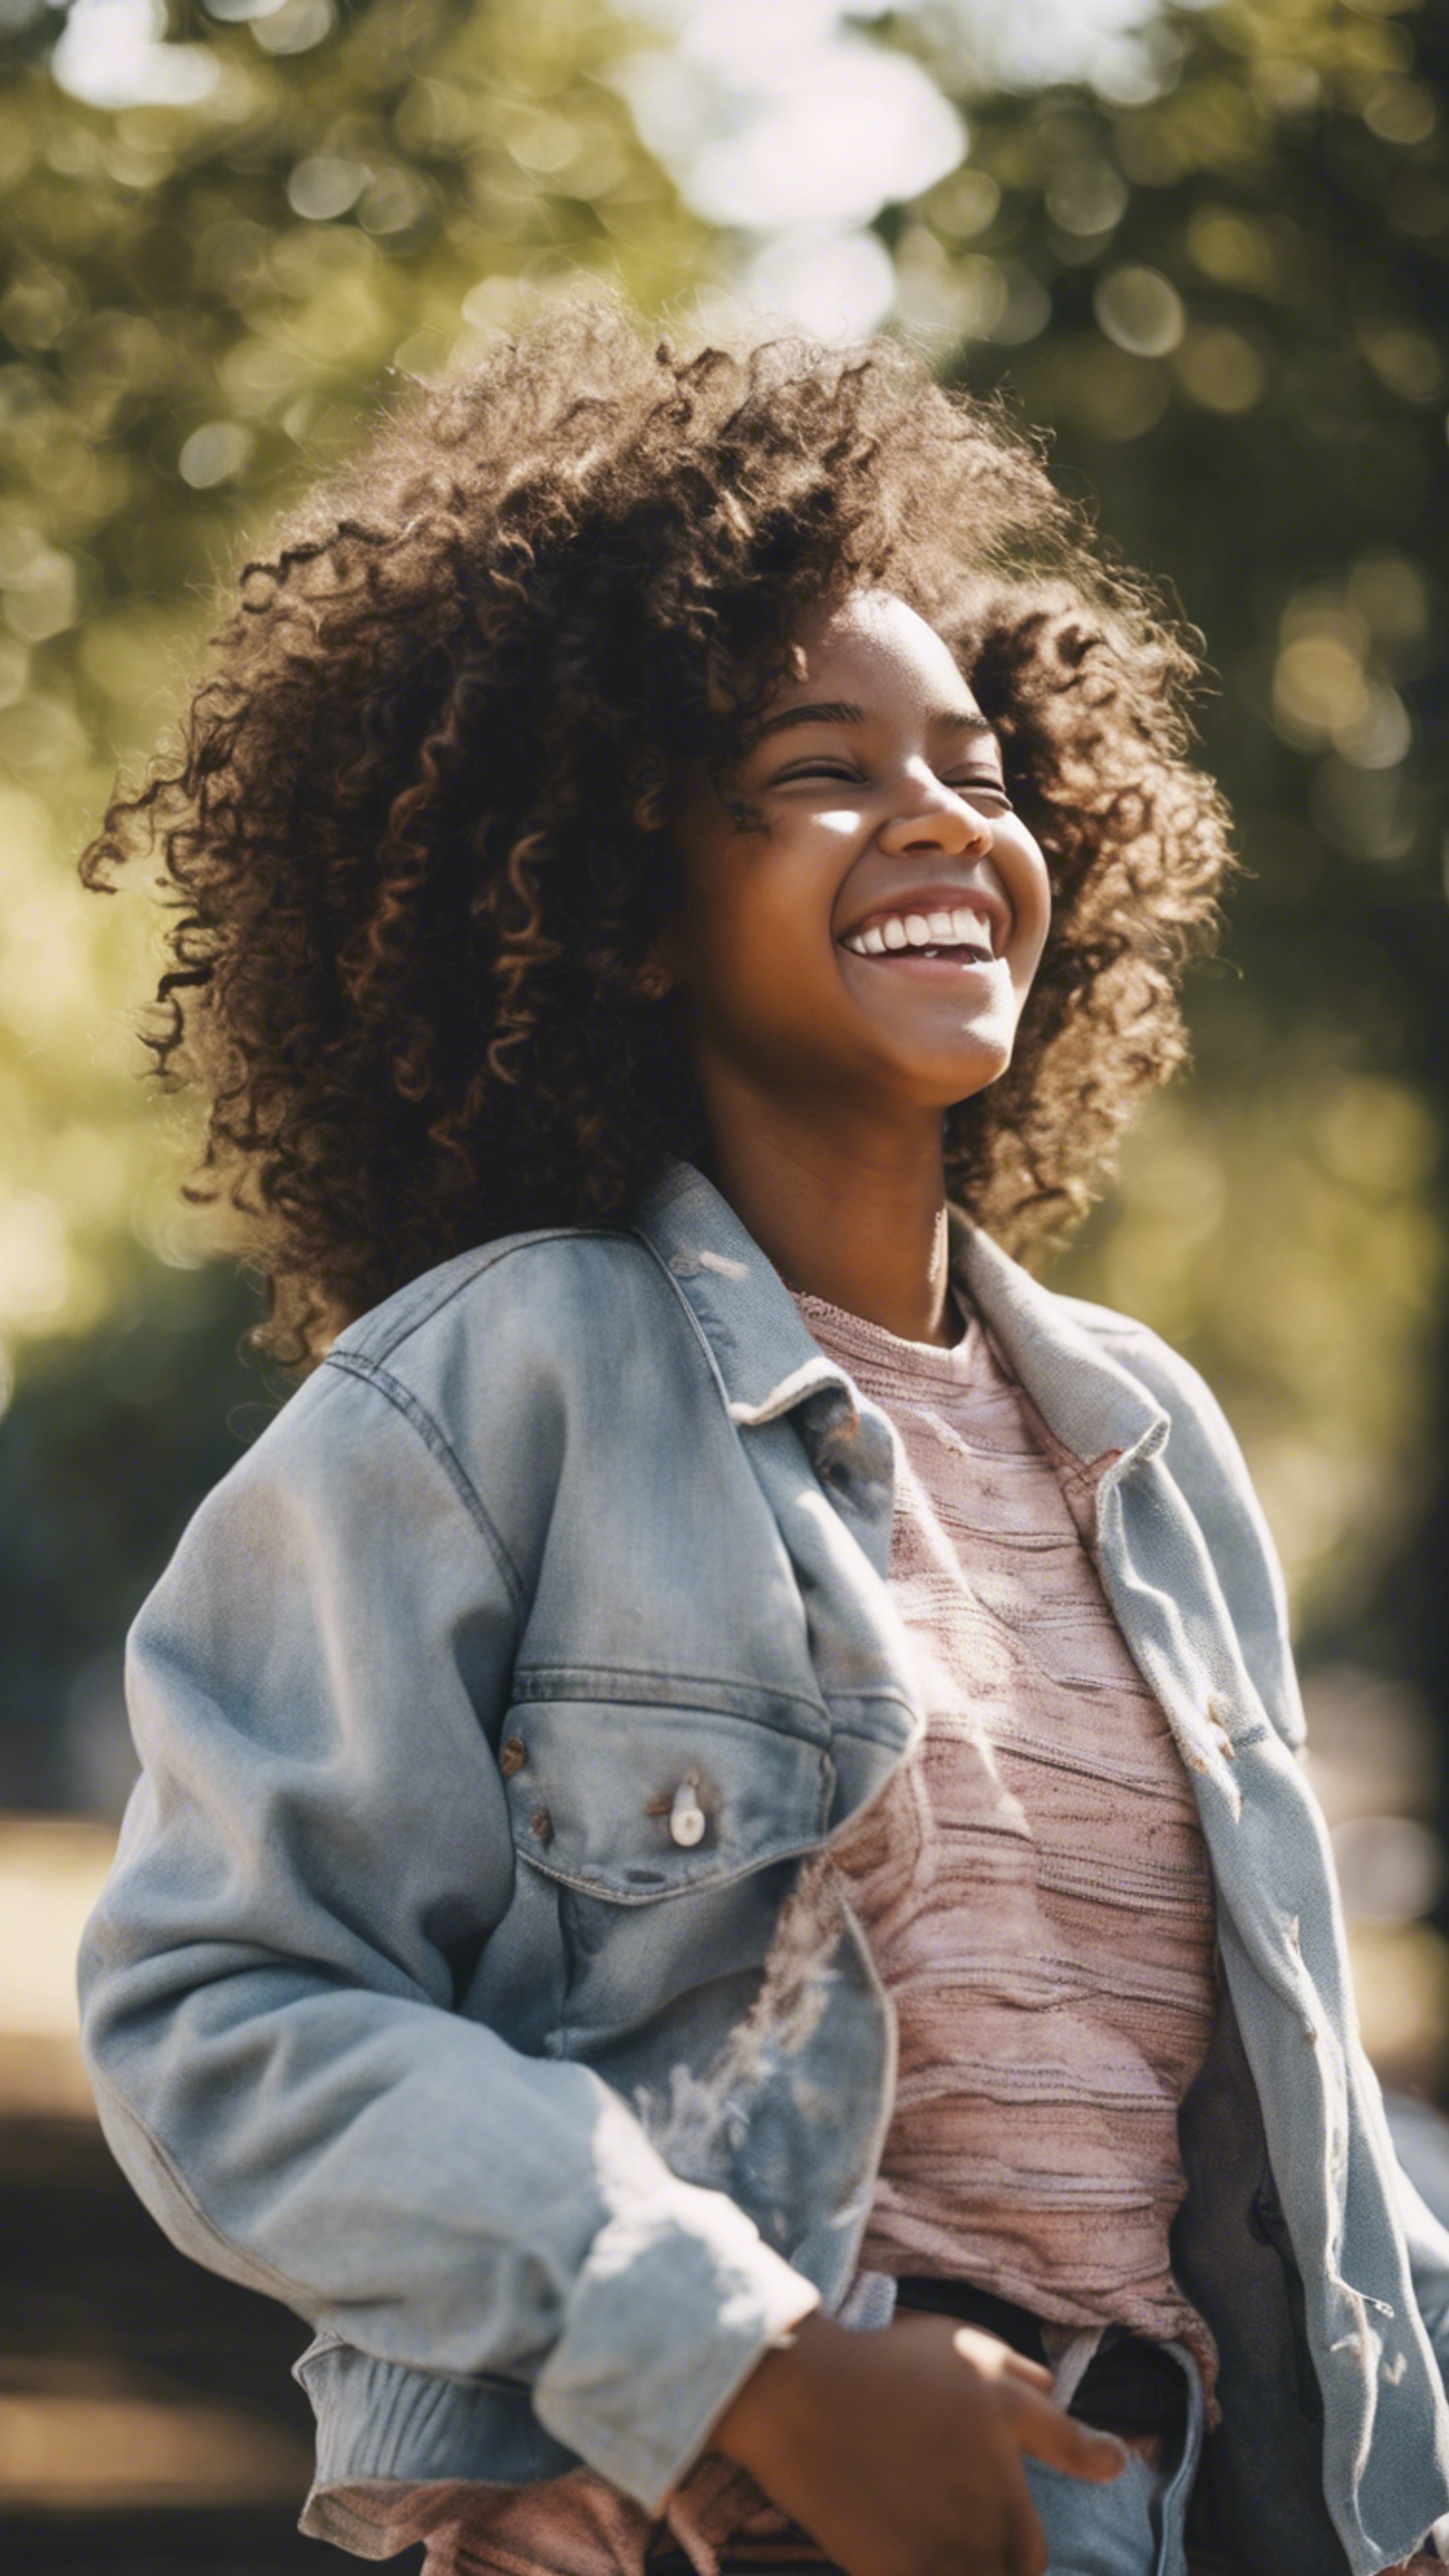 A confident young black girl with big, curly hair laughing while playing in a city park during a sunny afternoon.壁紙[a9bacc30abb04d56bfae]